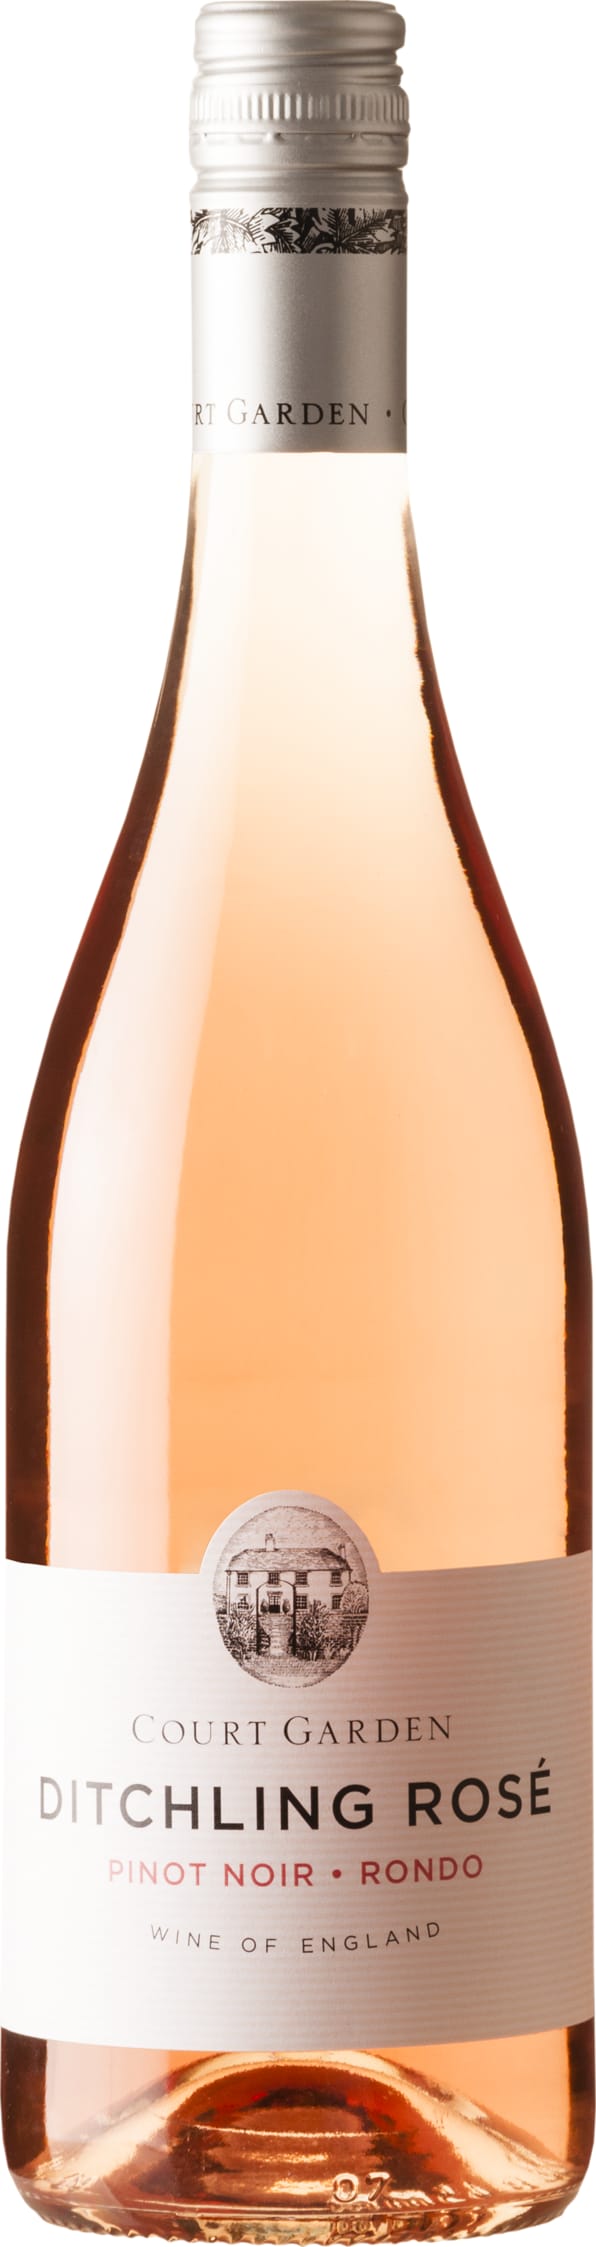 Ditchling Rose 21 Court Garden 6x75cl - Just Wines 